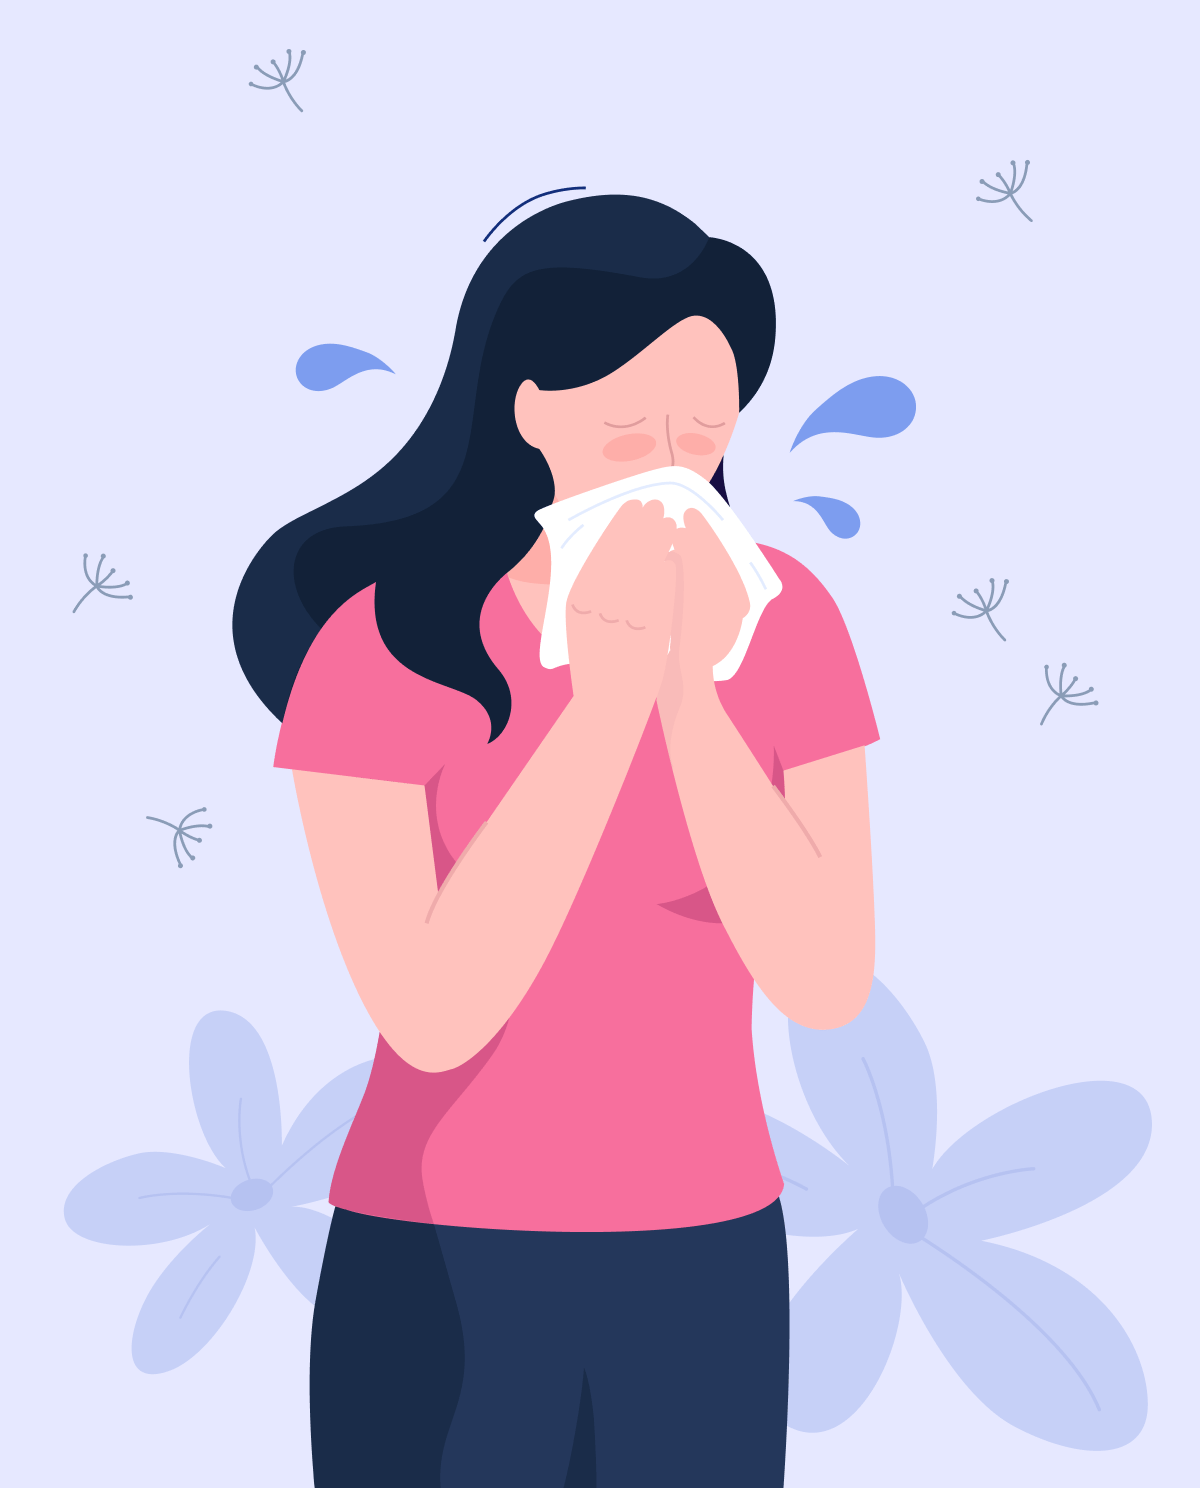 Allergies: causes, symptoms and complications, diagnostics, and treatments